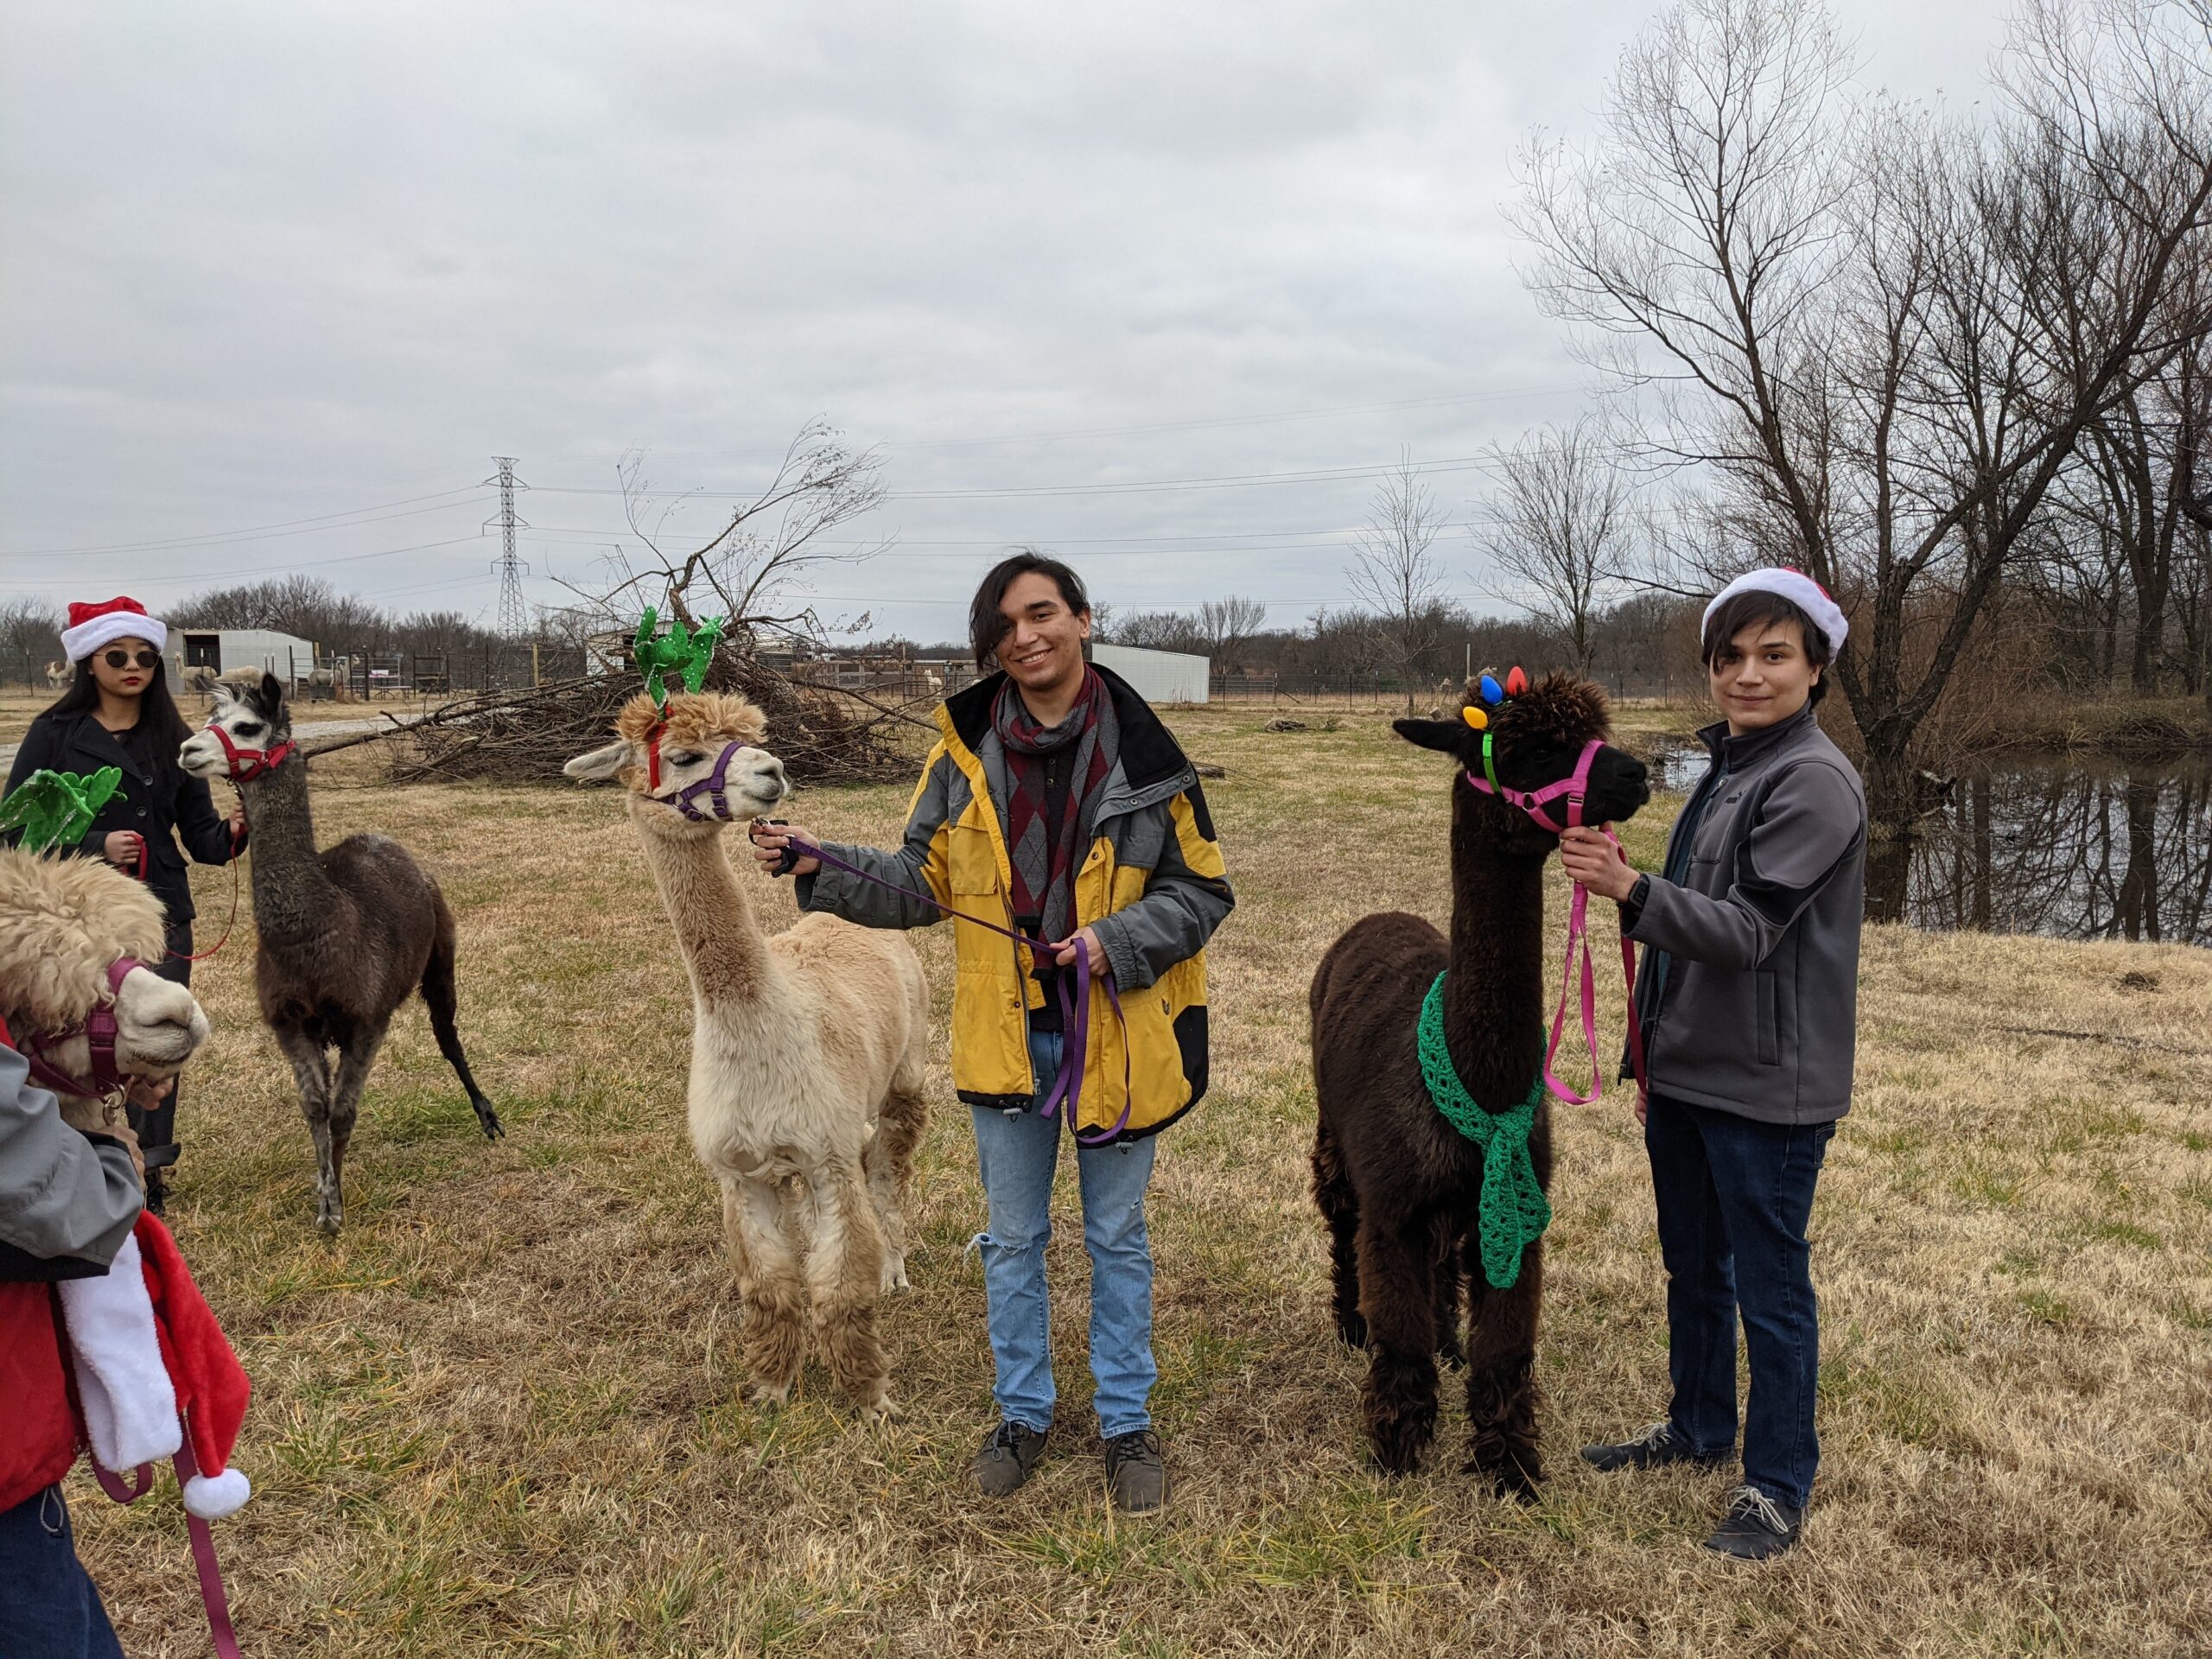 Walking with with Alpacas